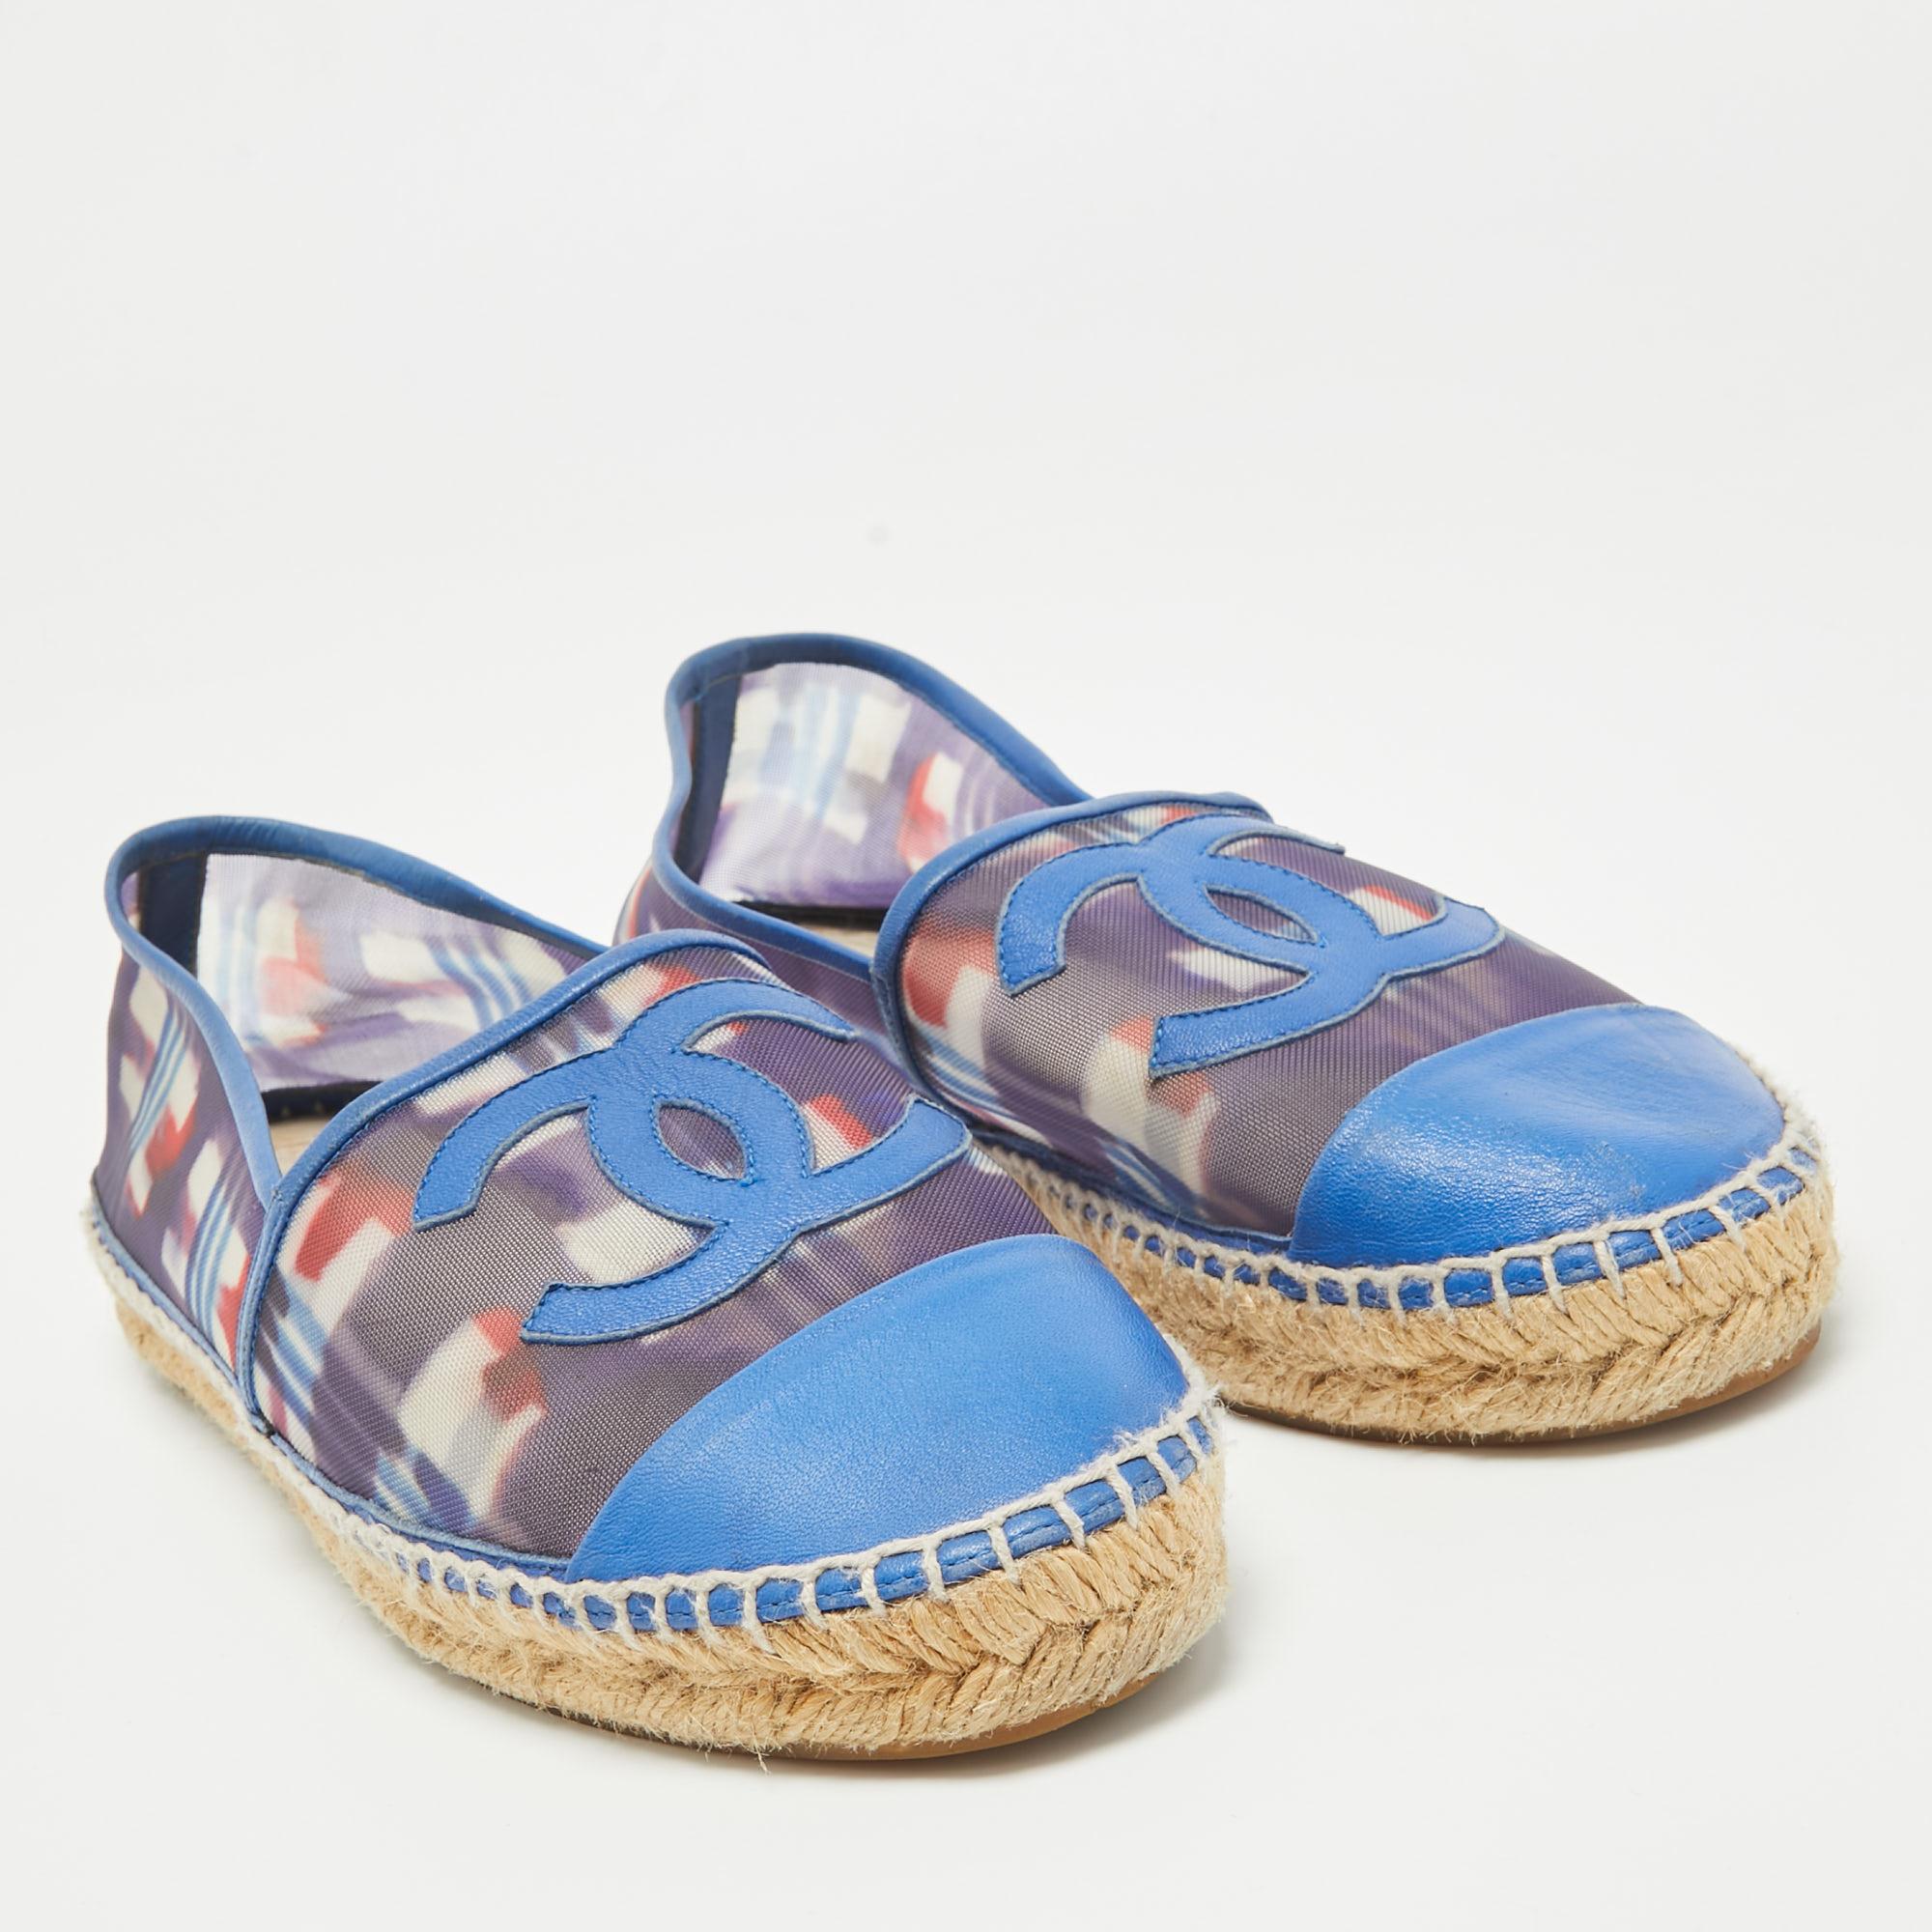 Women's Chanel Blue Printed Mesh and Leather CC Espadrille Flats Size 39